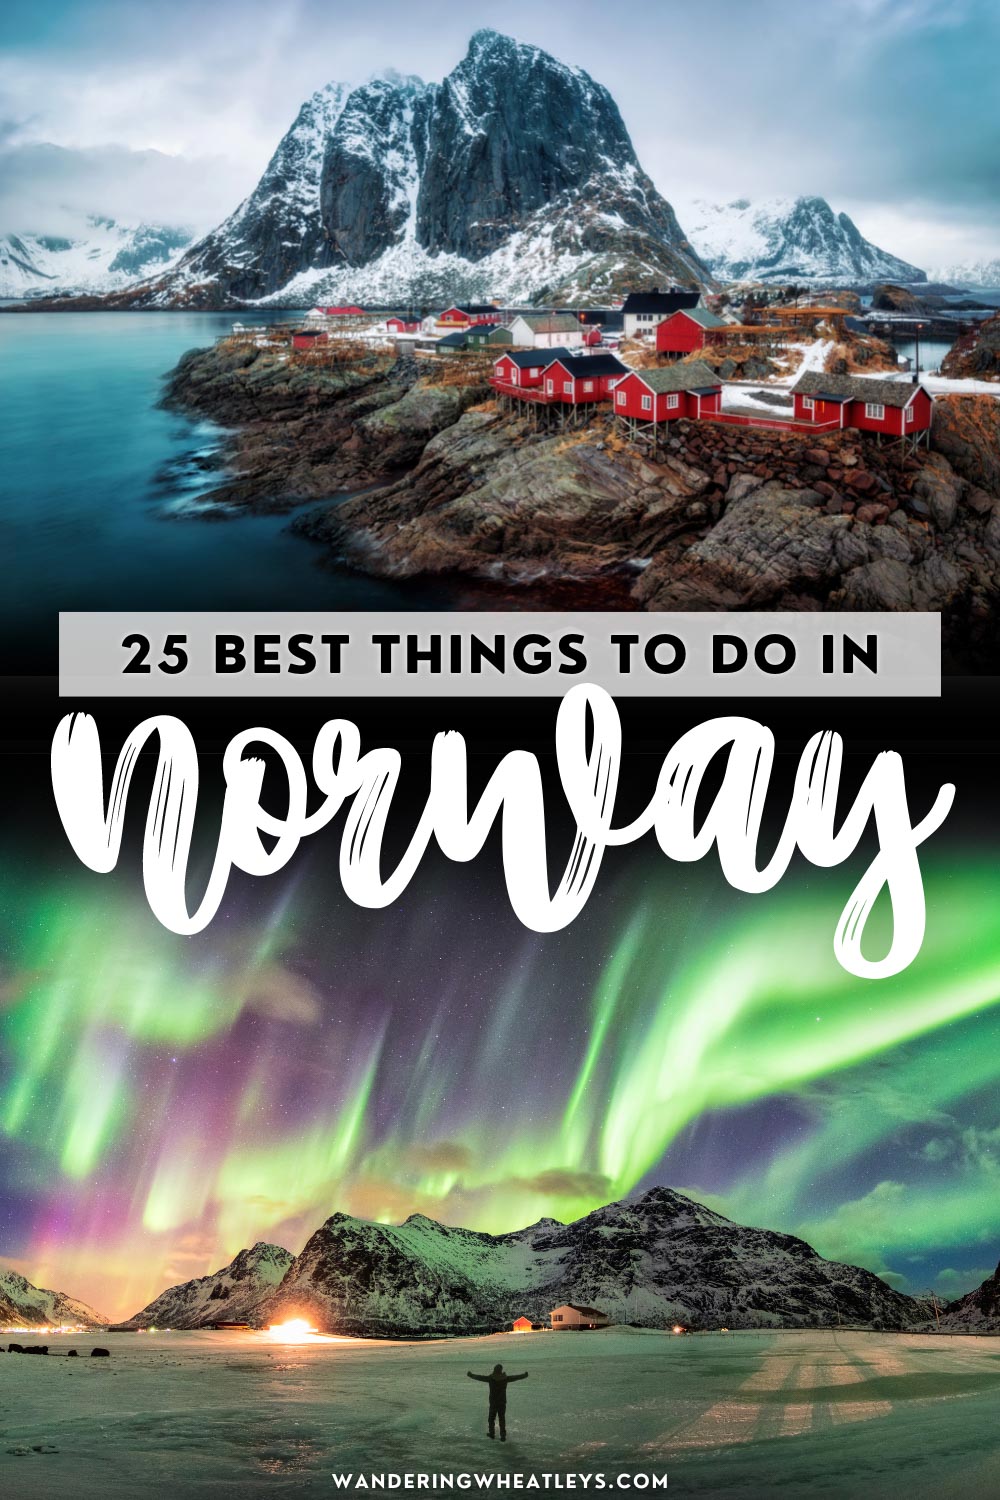 The Best Things to do in Norway